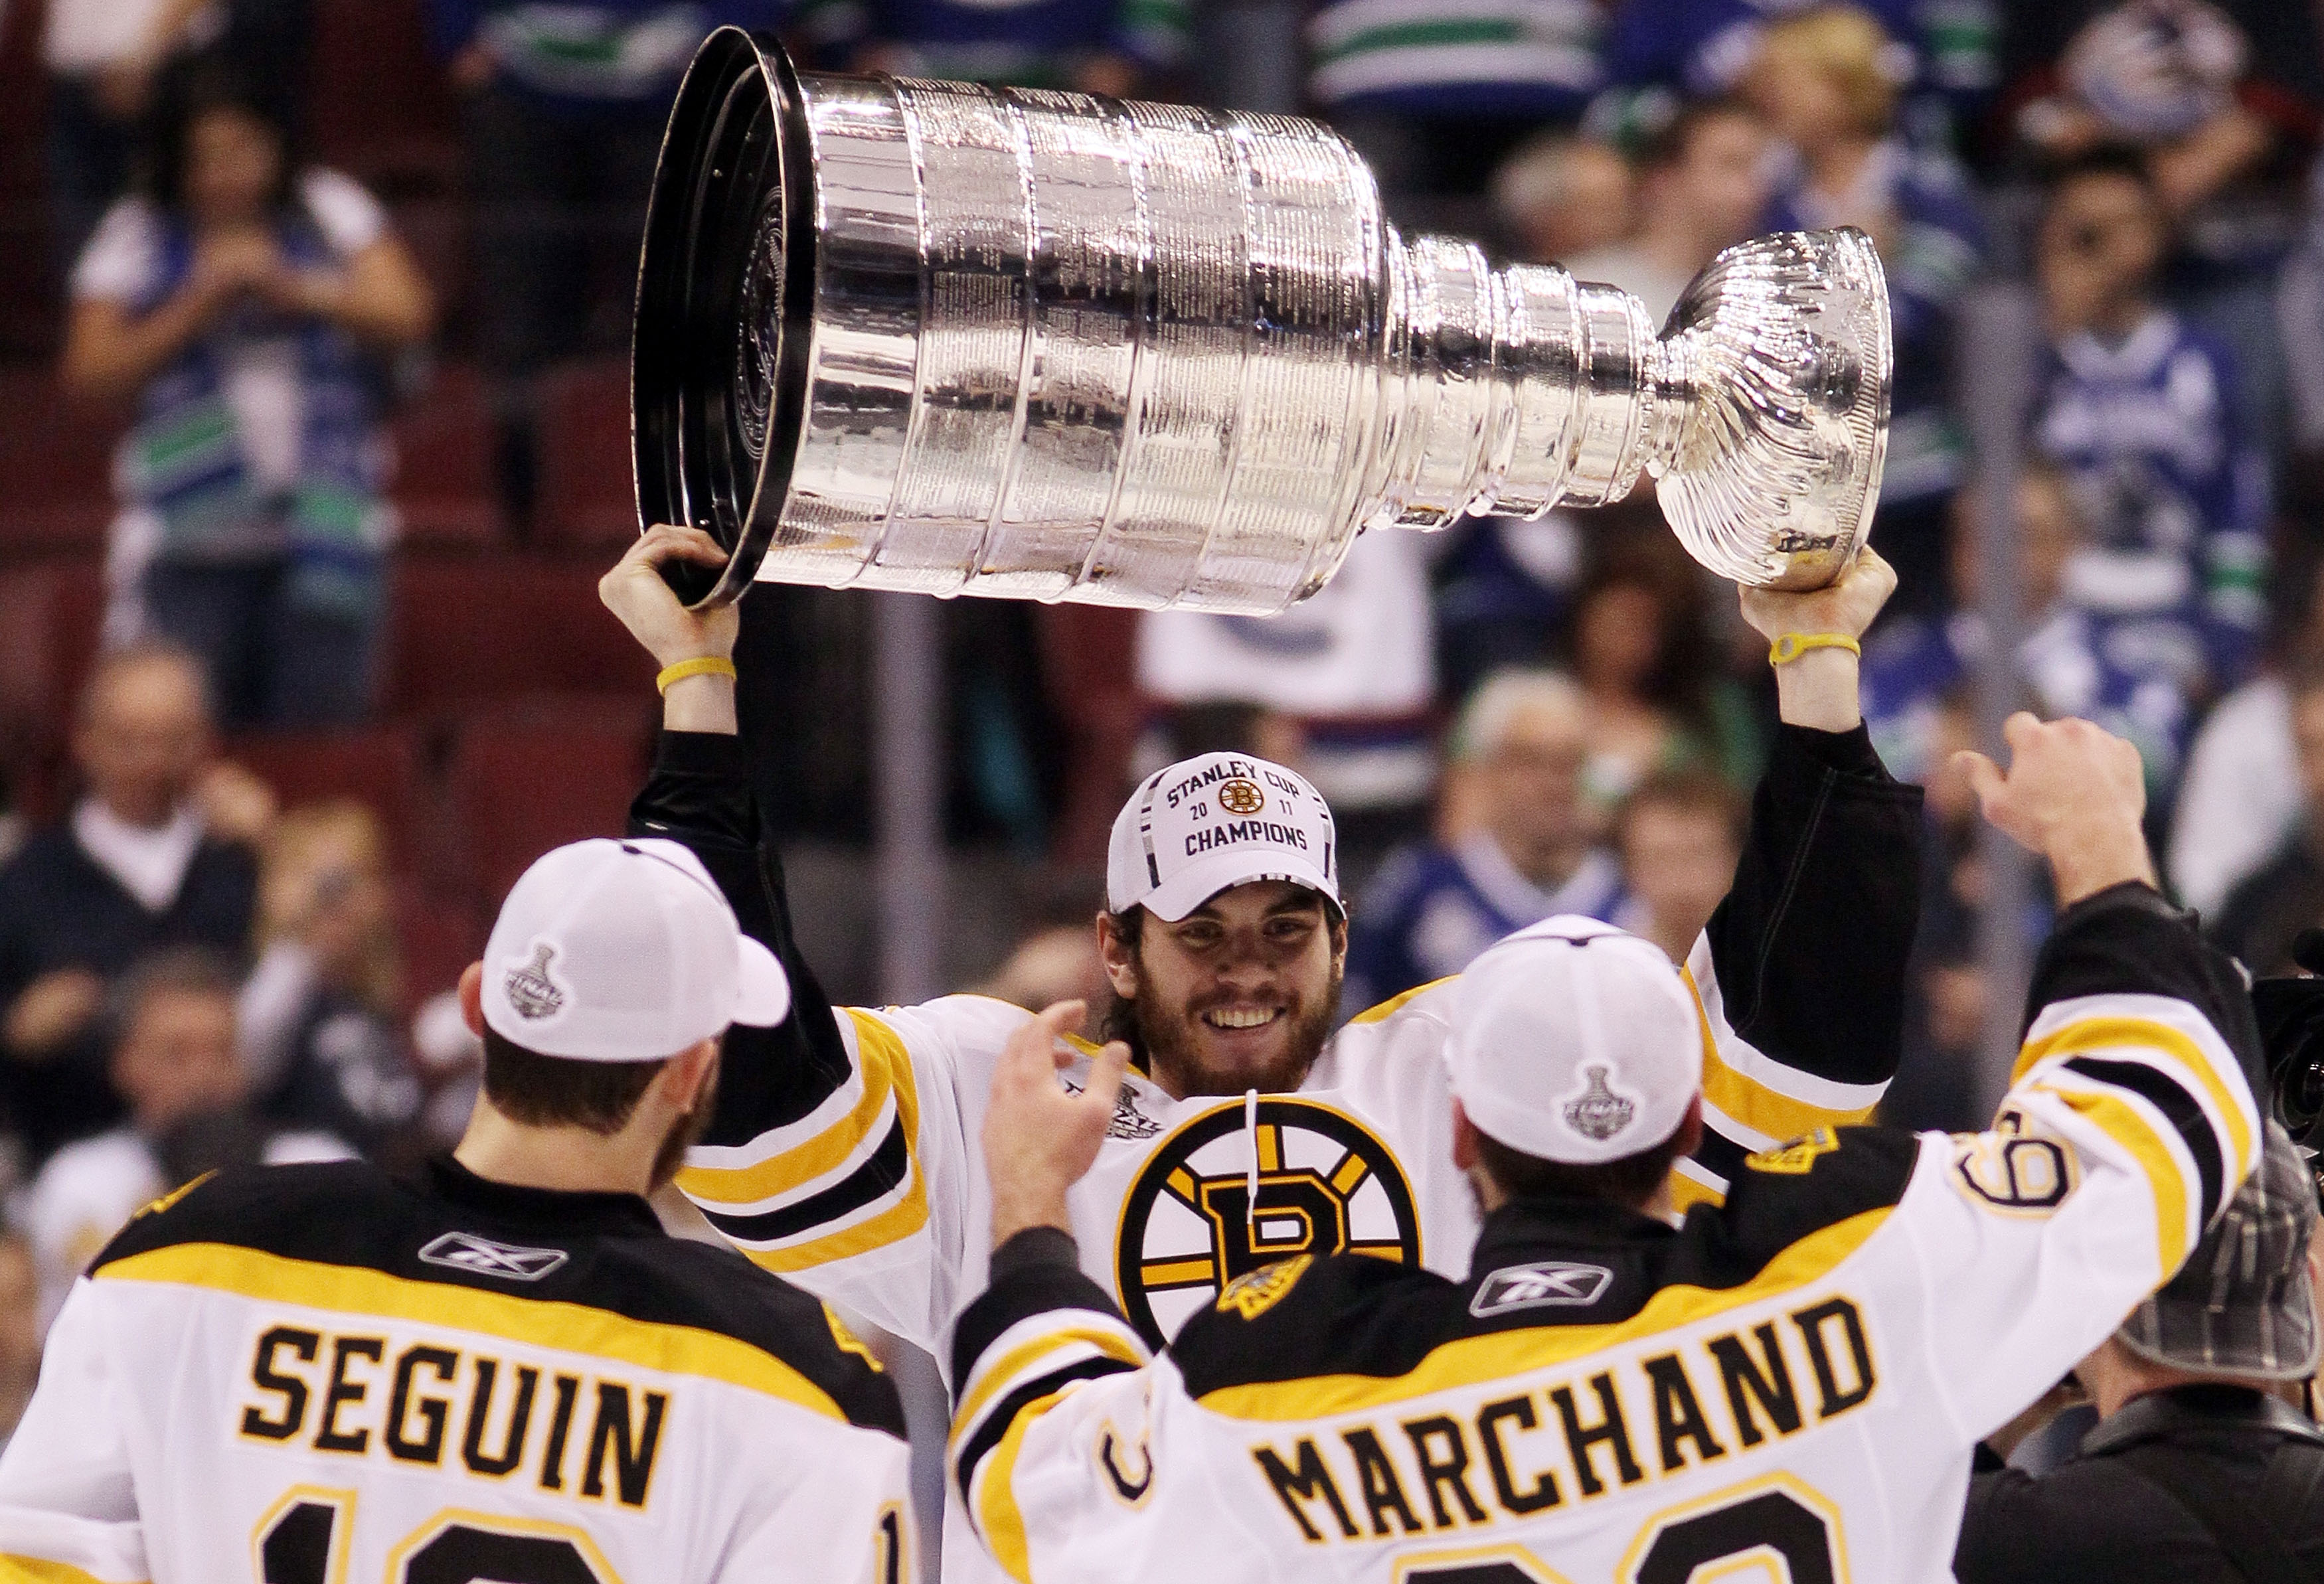 VANCOUVER, BC - JUNE 15:  Adam McQuaid #54 of the Boston Bruins hands the Stanley Cup to Brad Marchand #63 after defeating the Vancouver Canucks in Game Seven of the 2011 NHL Stanley Cup Final at Rogers Arena on June 15, 2011 in Vancouver, British Columbi